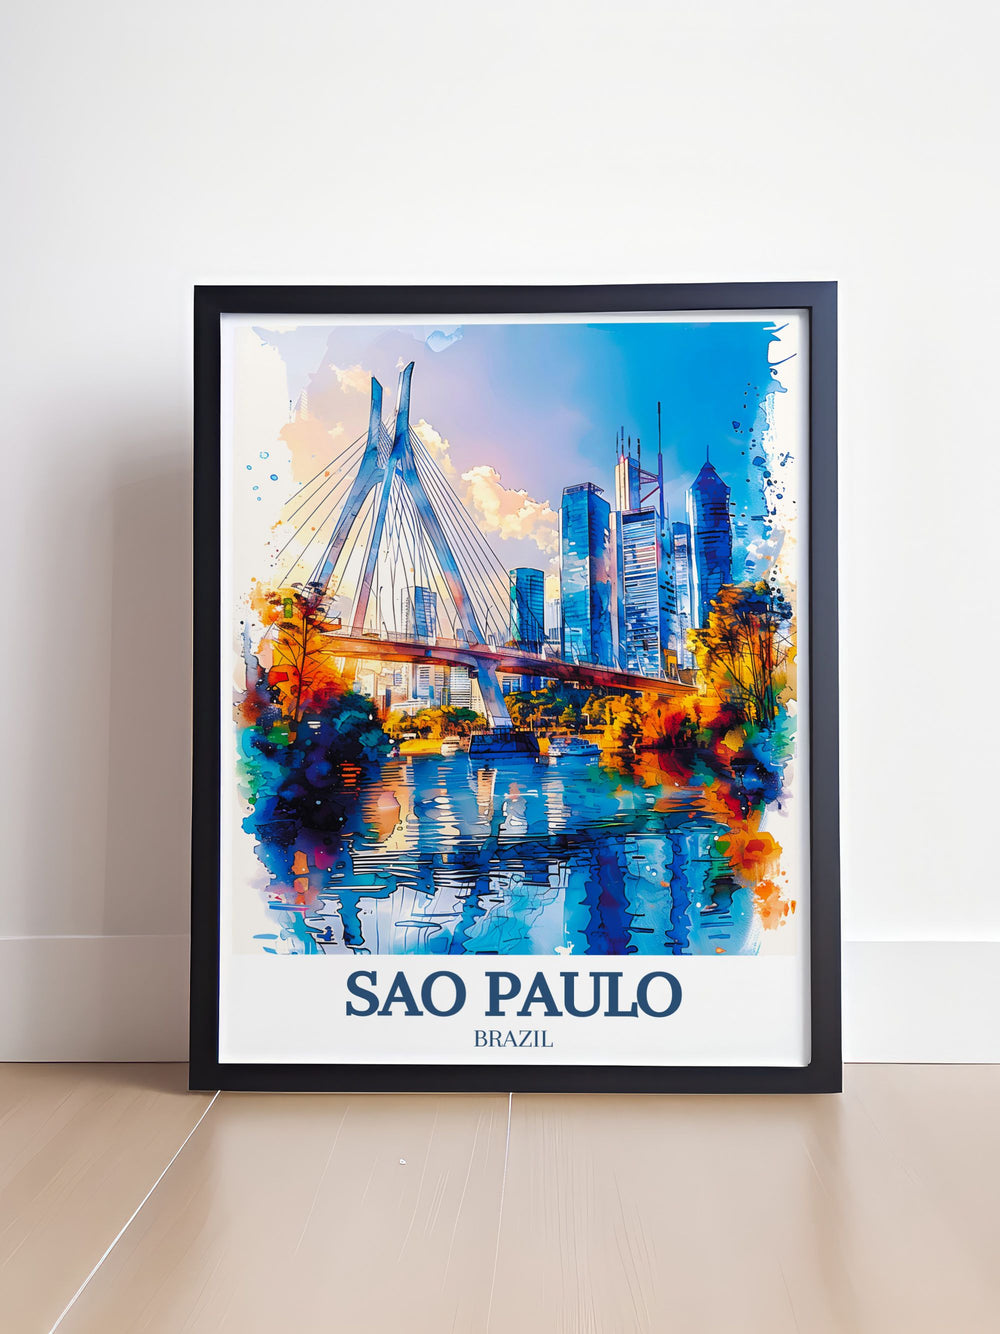 This Sao Paulo print beautifully captures the vibrant energy of the Marginal Pinheiros expressway, showcasing the citys dynamic pulse and modern design.